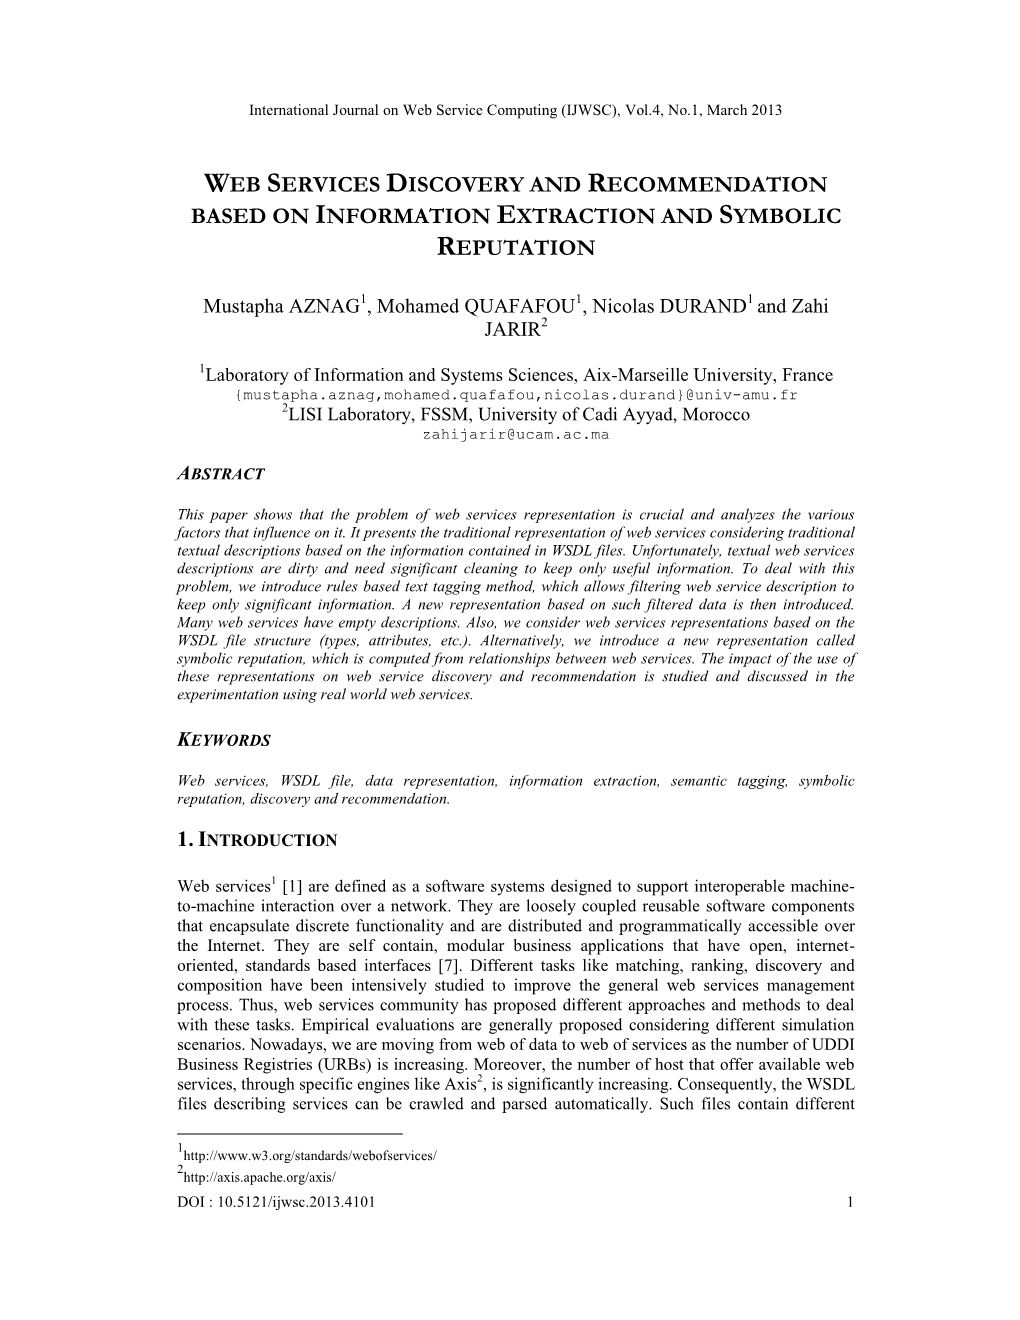 Web Services Discovery and Recommendation Based on Information Extraction and Symbolic Reputation